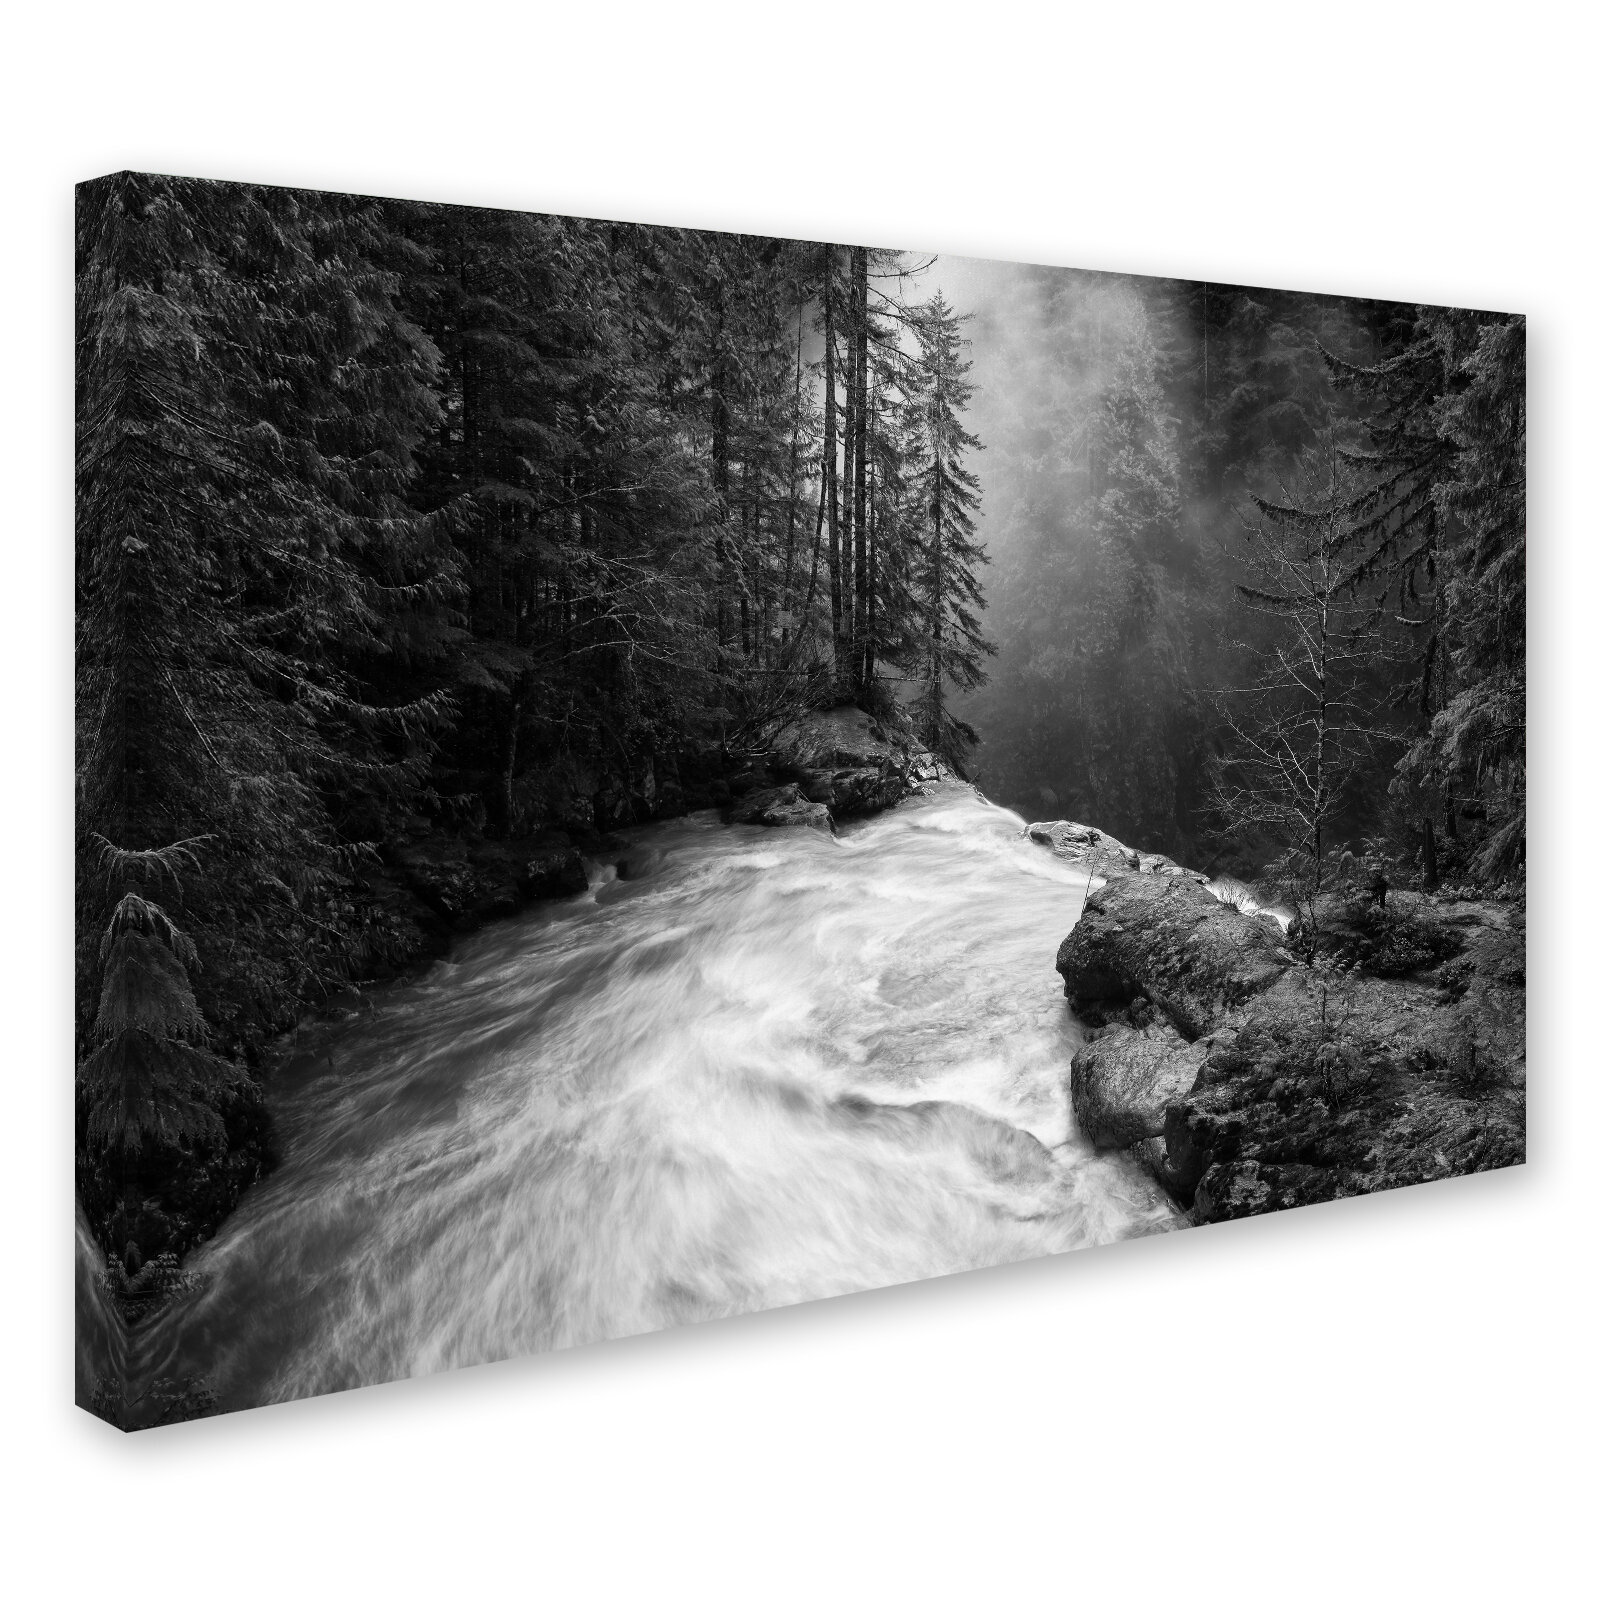 Trademark Art Over The Falls On Canvas by James K. Papp Print | Wayfair